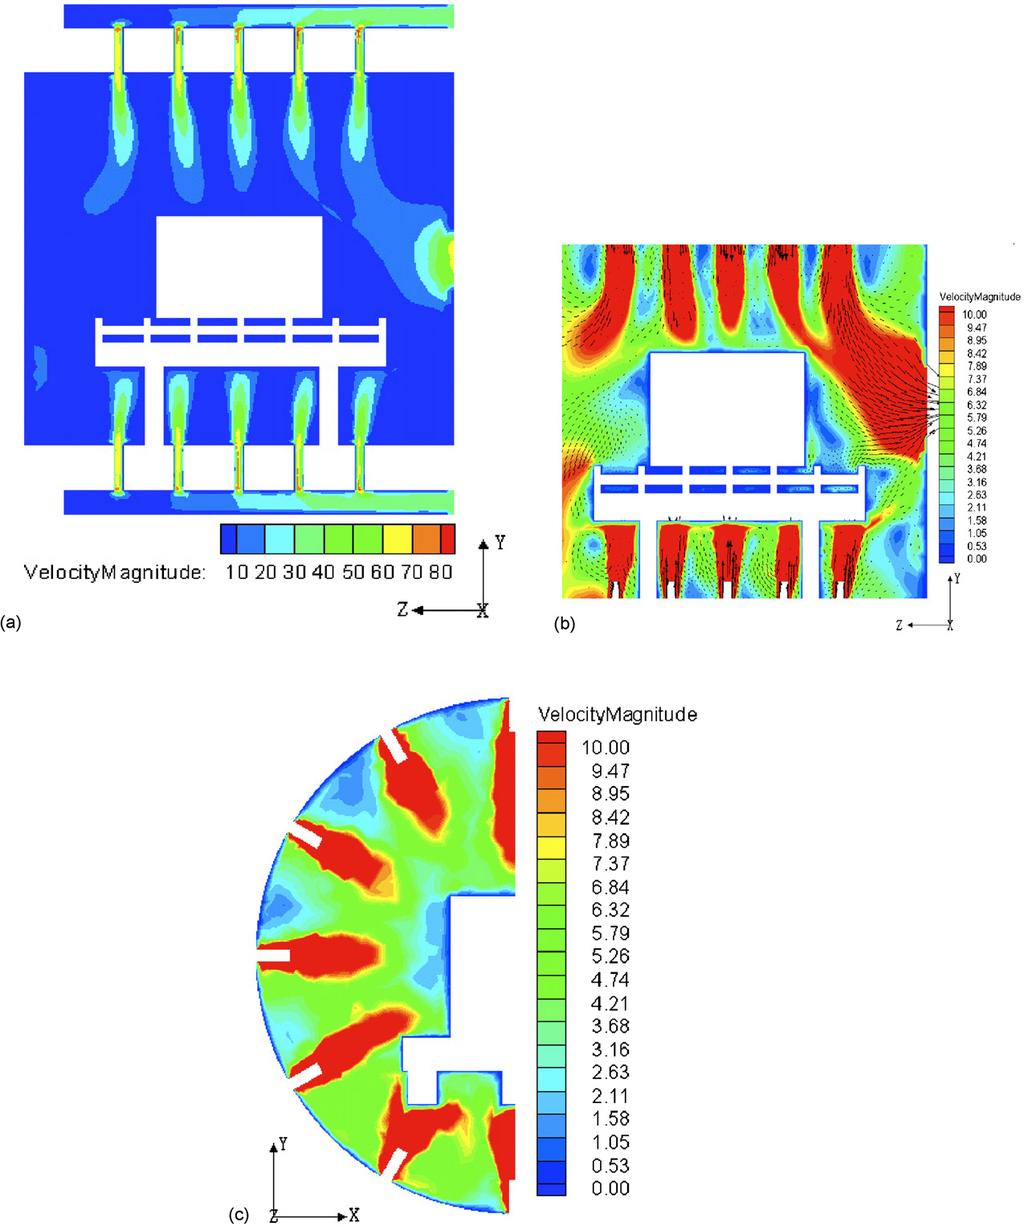 journal of materials processing technology 202 (2008) 188 194 191 4. Results and discussion The velocity distribution of the gas has been obtained, and is shown through different cross sections (Fig.